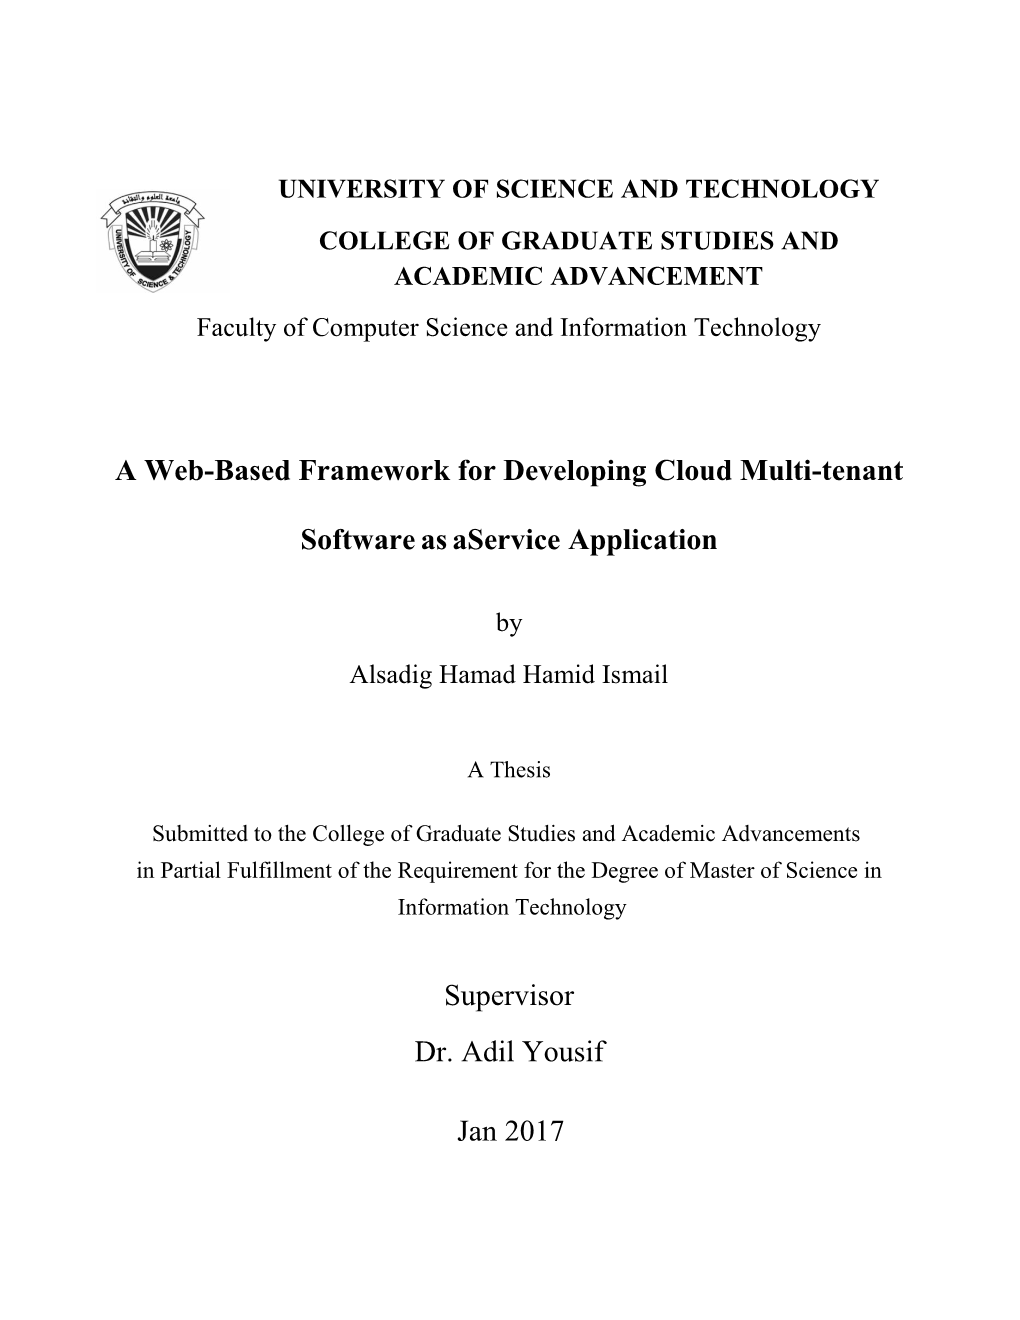 A Web-Based Framework for Developing Cloud Multi-Tenant Softwareasaservice Application Supervisor Dr. Adil Yousif Jan 2017